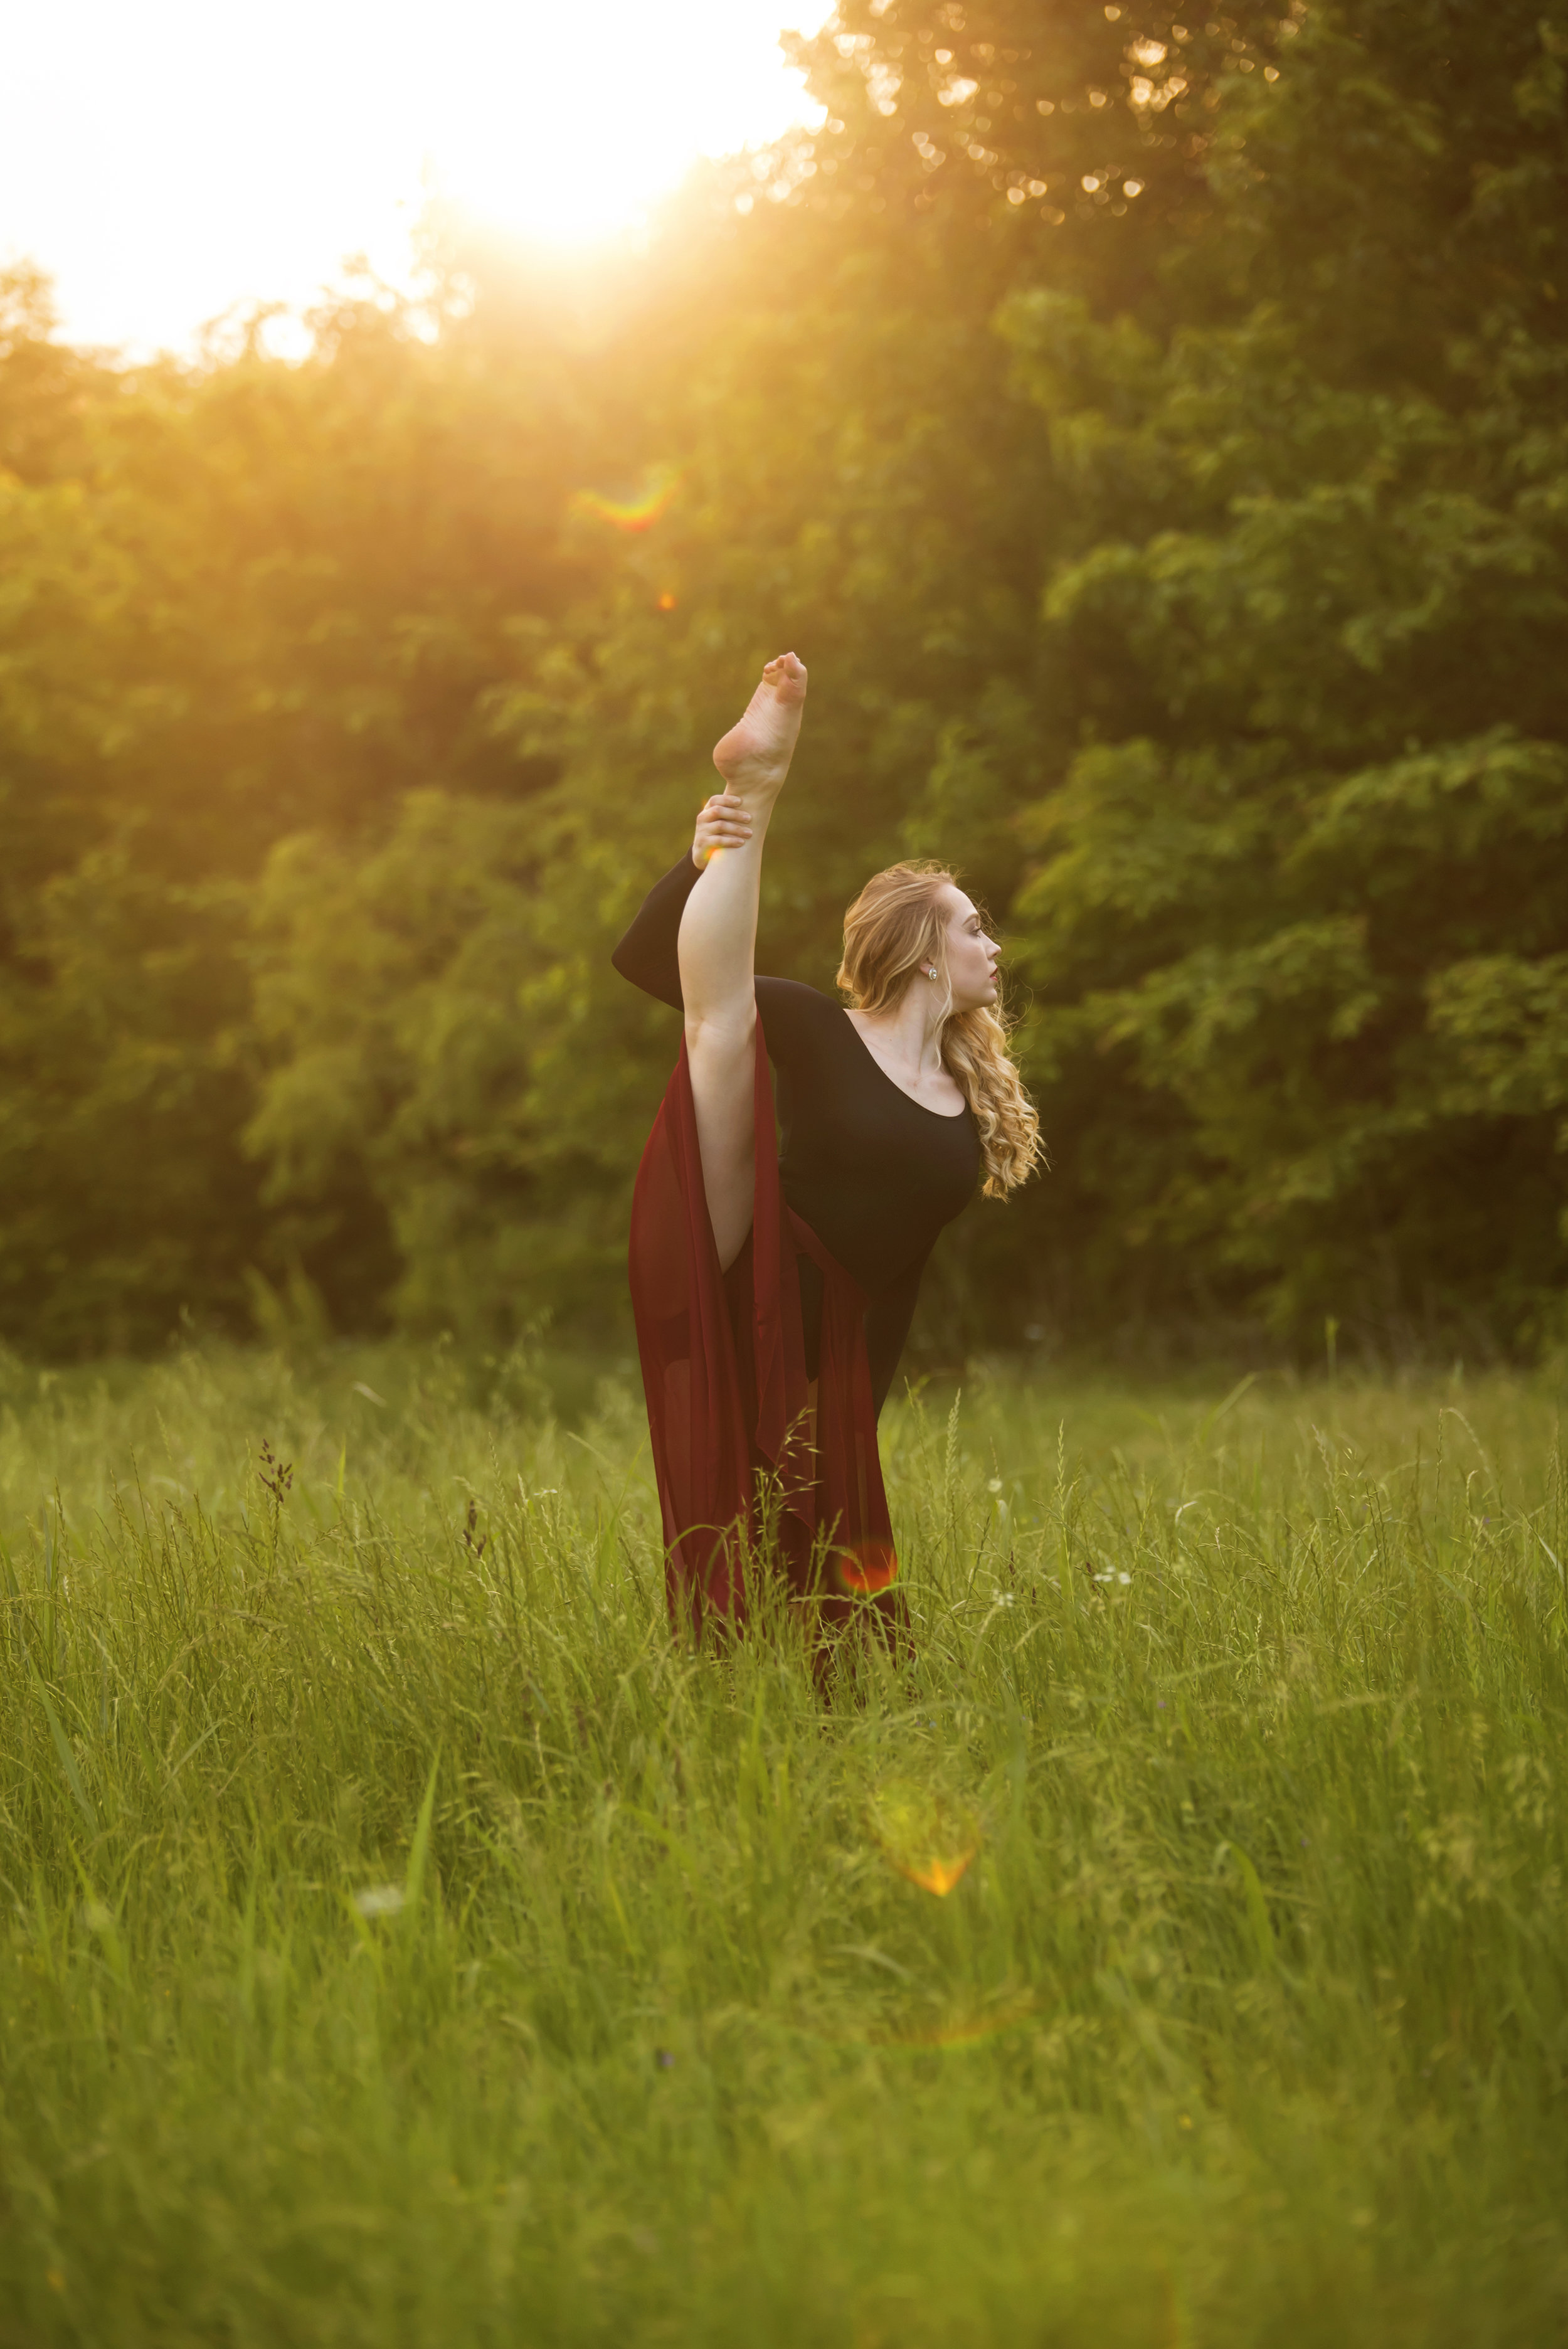  Lifestyle portrait of woman in field at sunset, looking away from camera while holding one leg extended in the splits. 